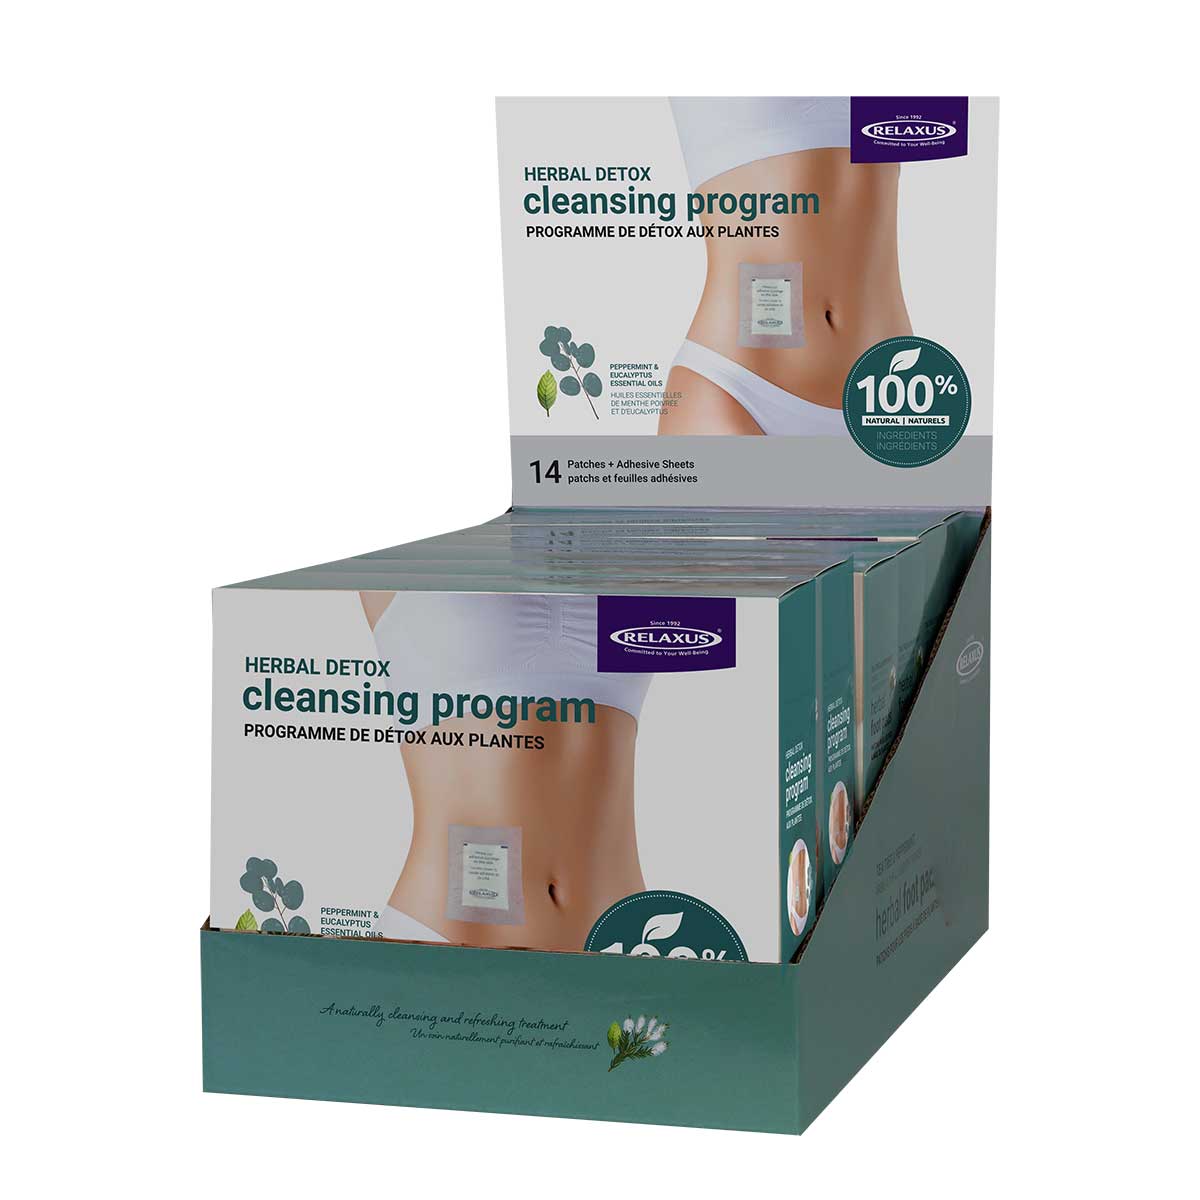 Herbal Detox Cleansing Belly Patches – Relaxus Professional